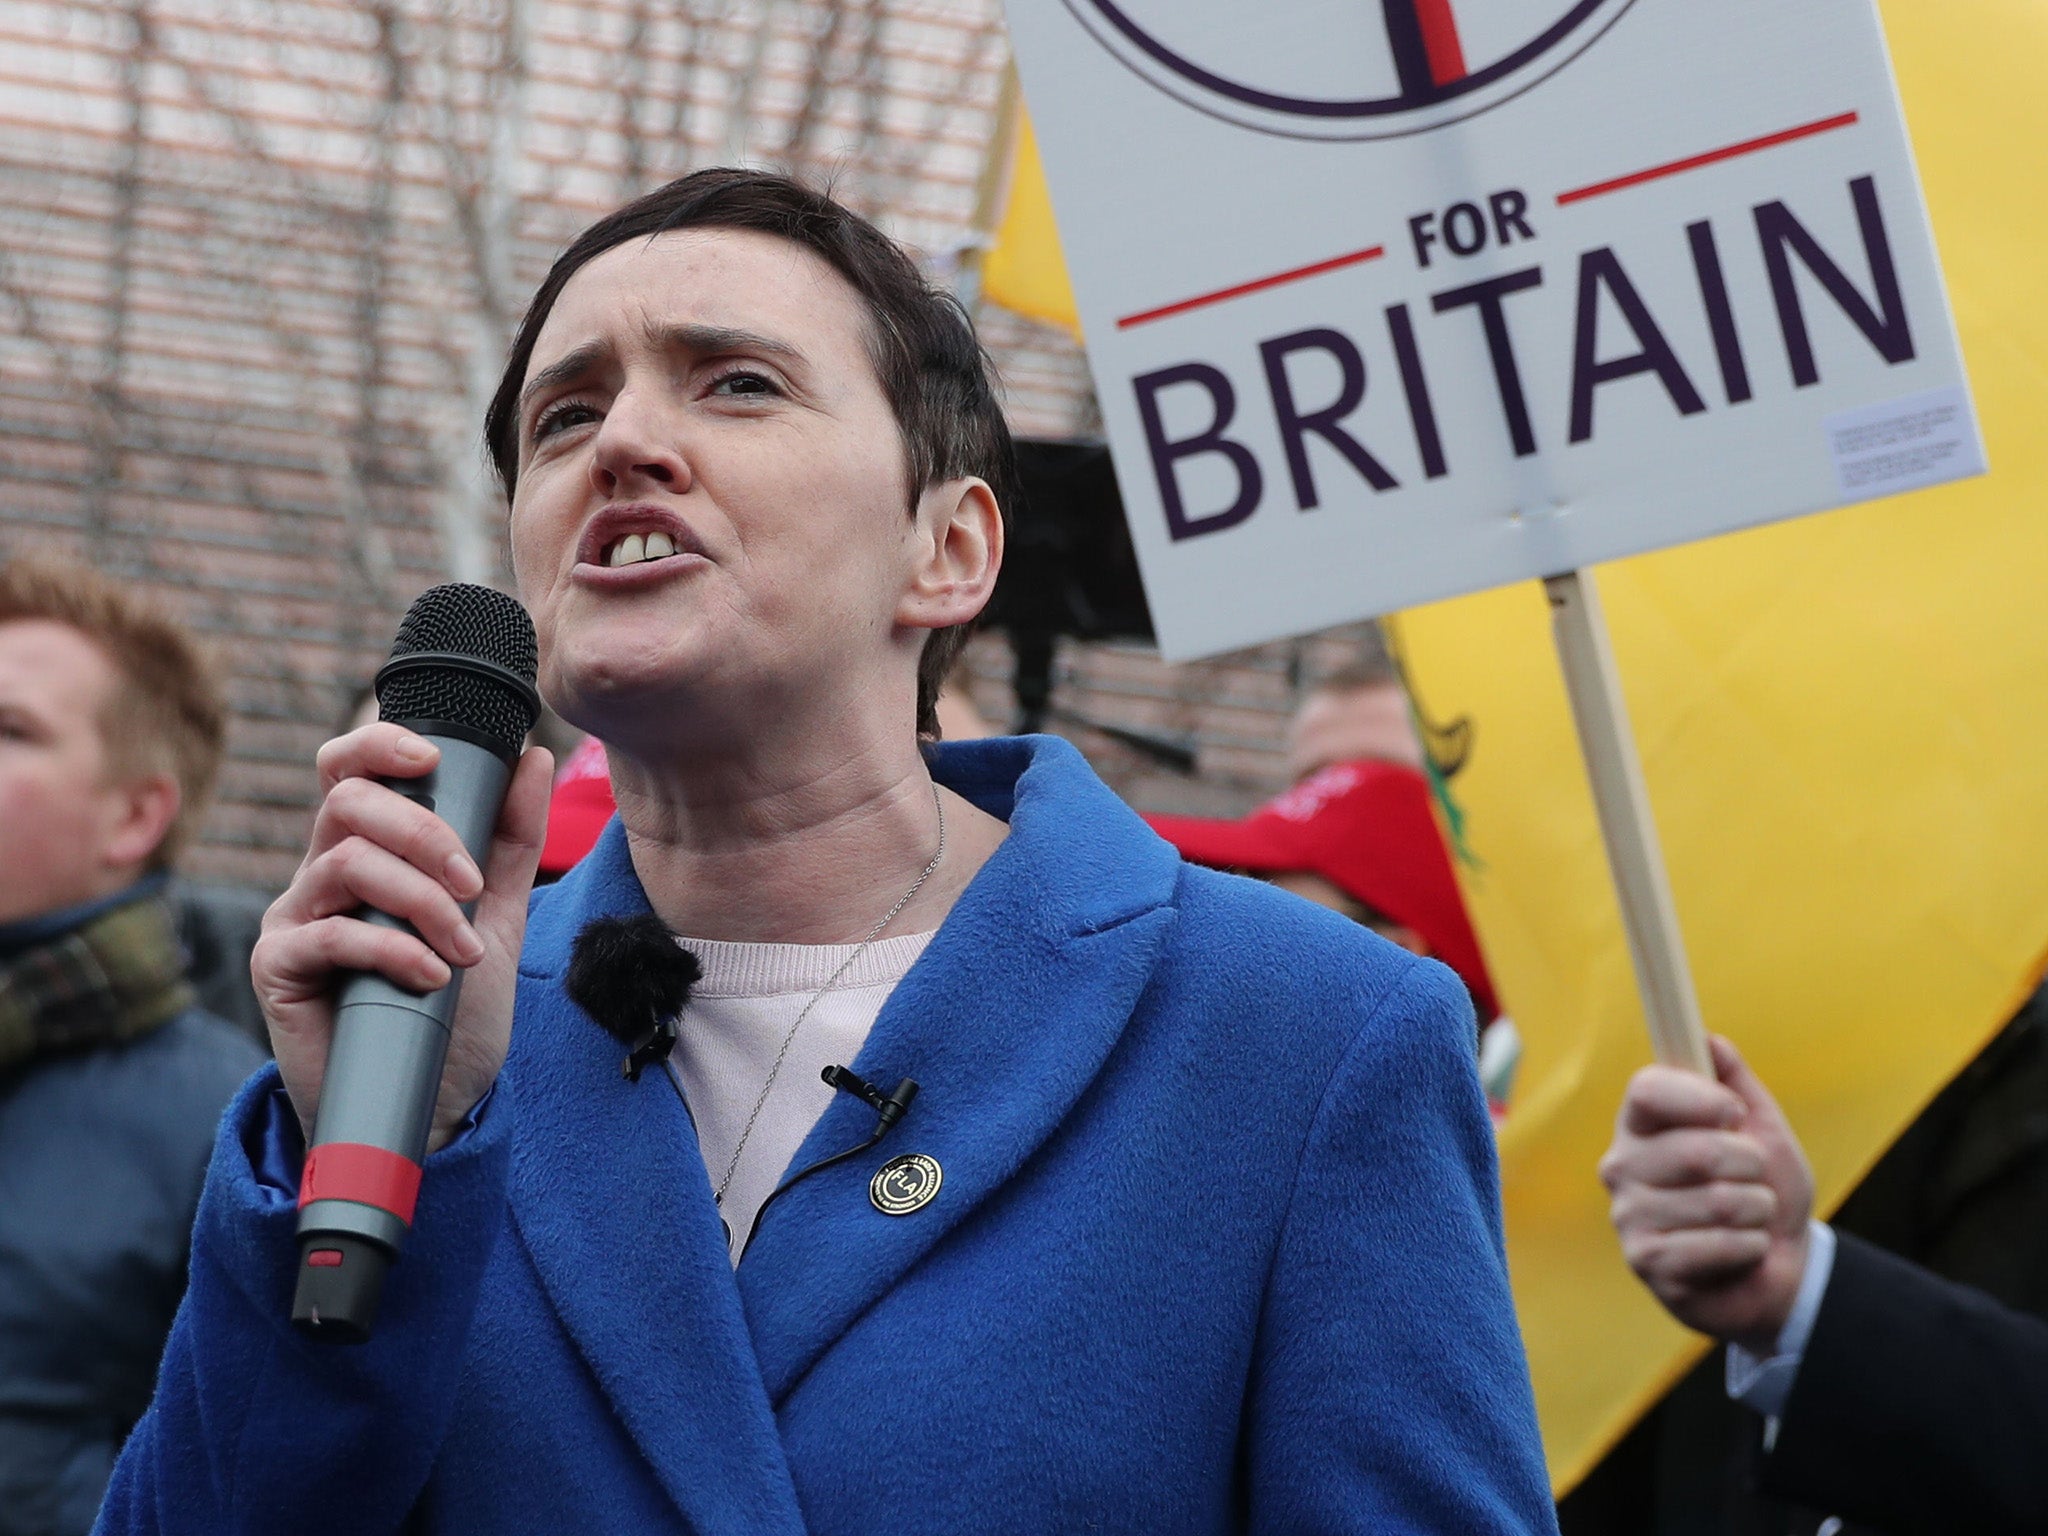 Anne Marie Waters has said ‘immigration from Islamic countries has to stop entirely’